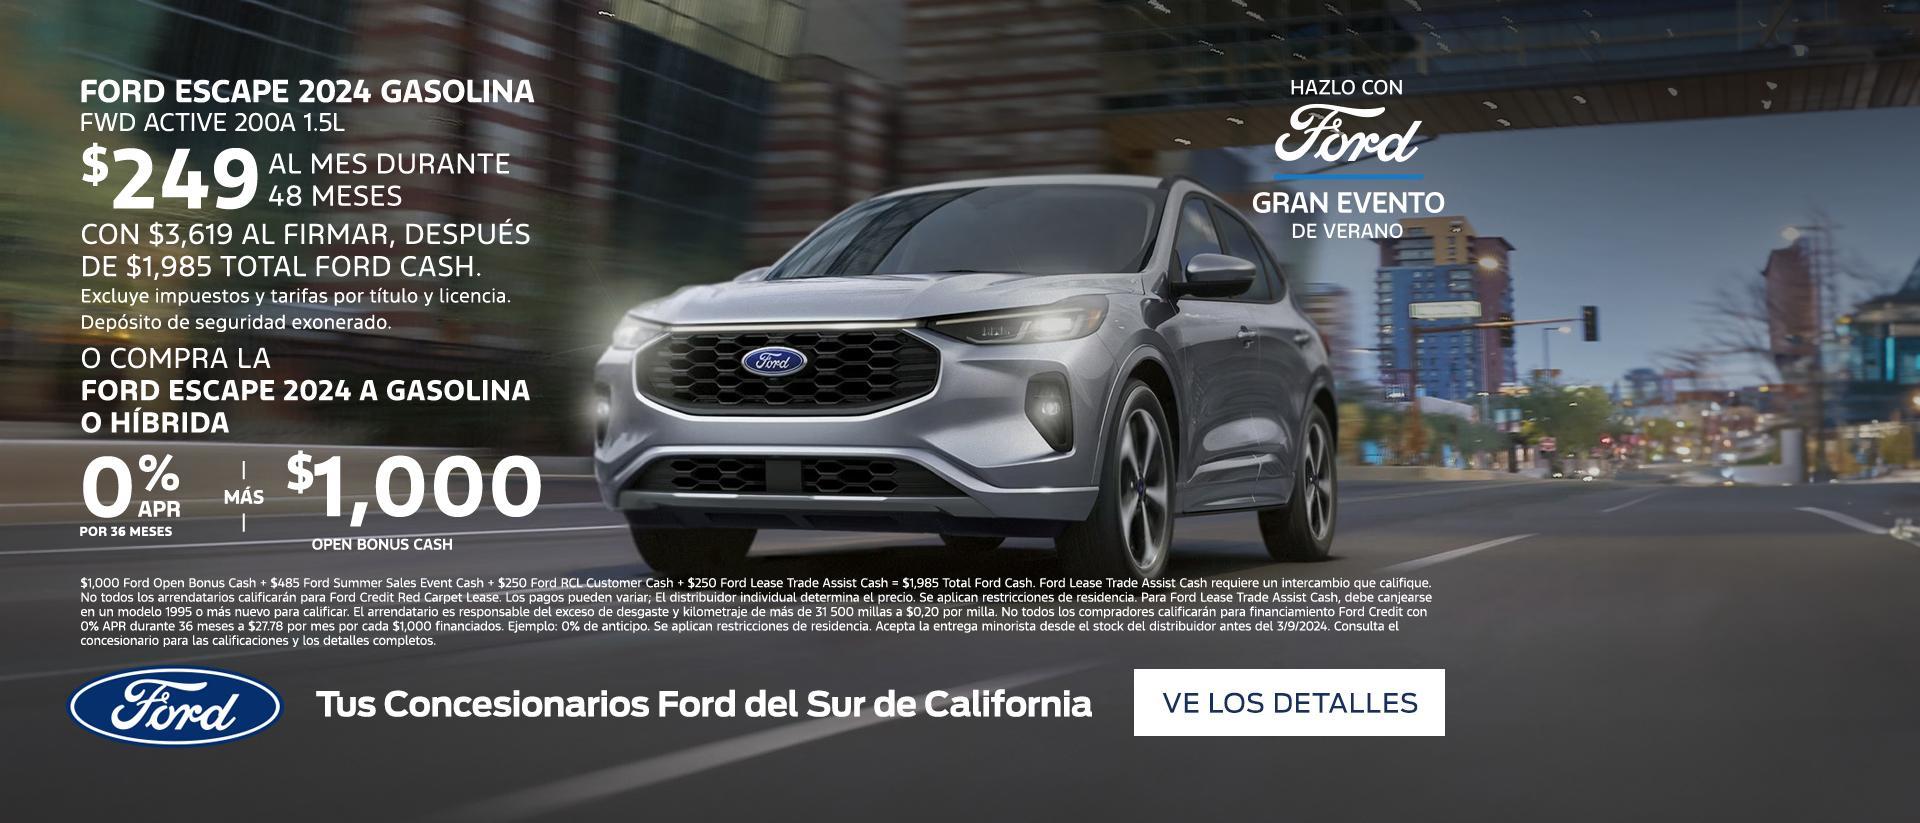 Make it Ford Summer Sales Event | Ford Escape Gas Offers | Southern California Ford Dealers